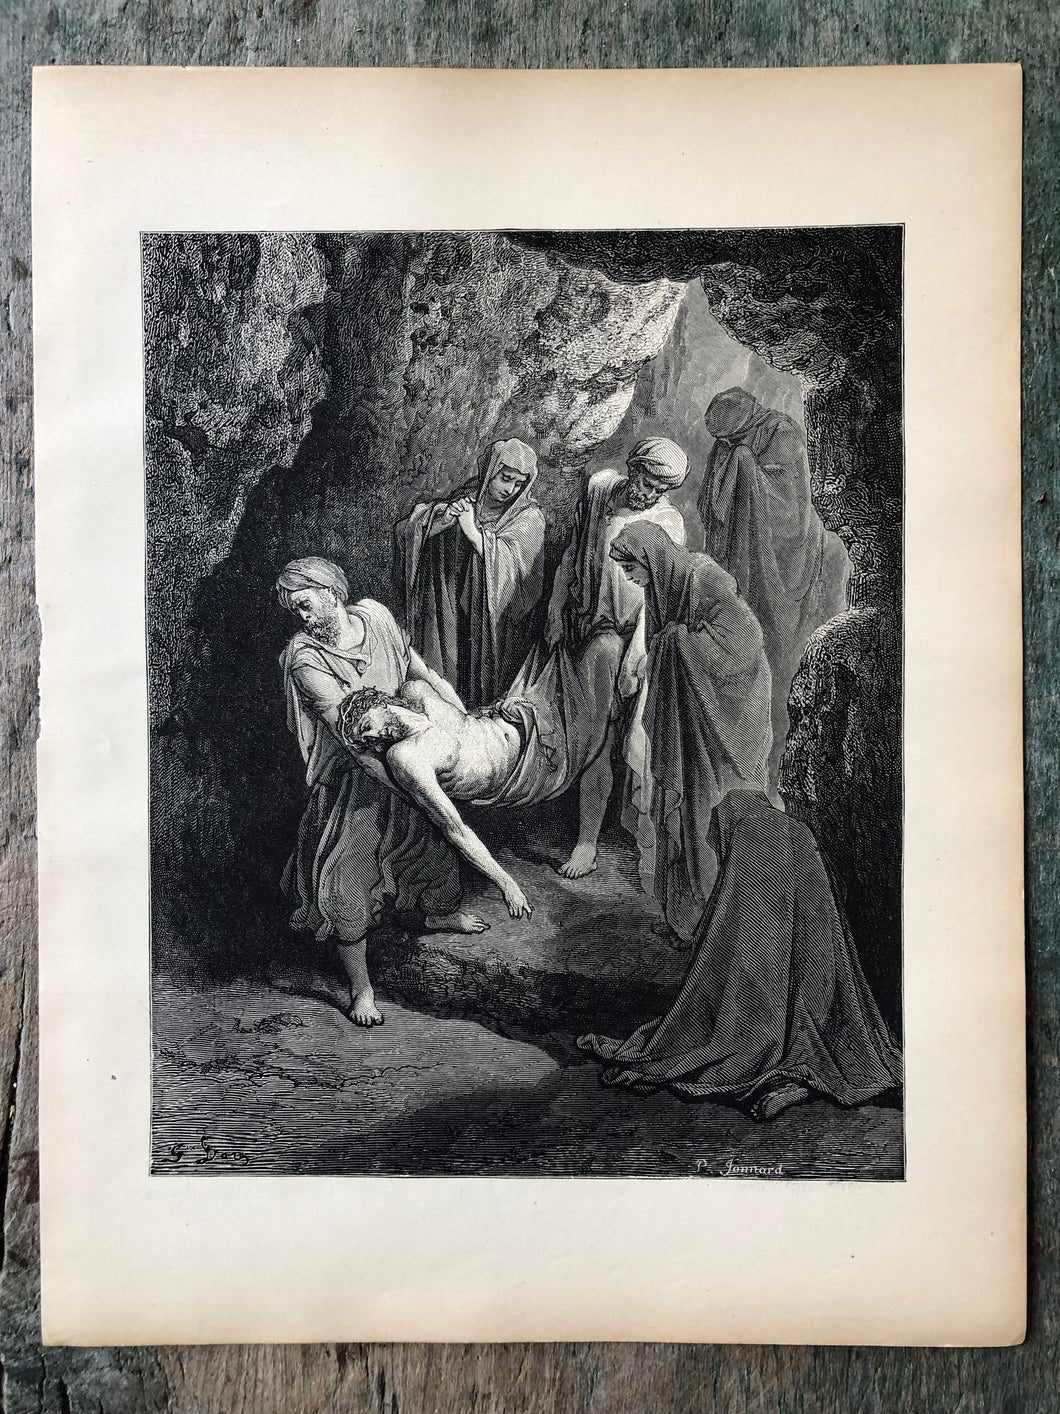 The Burial of Jesus. Print from The Dore Bible Gallery by Gustave Dore